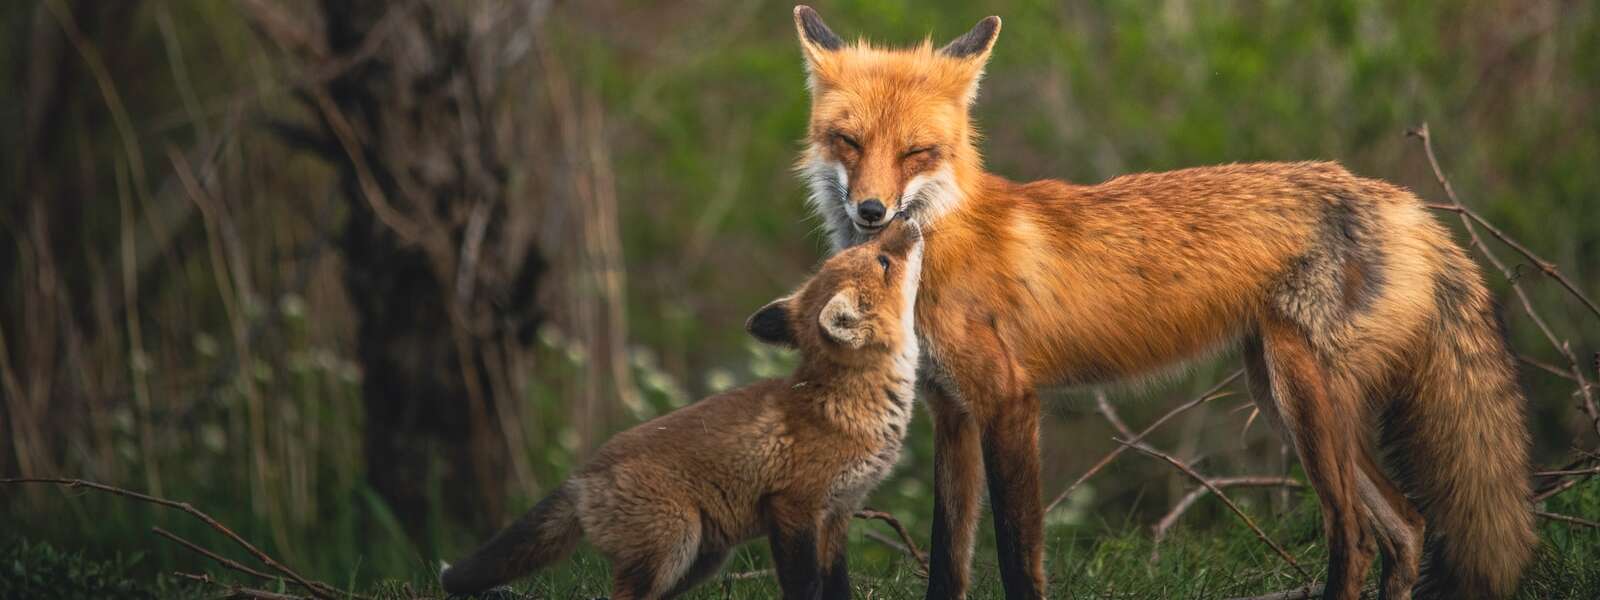 A fox kit and its parent in the woods.